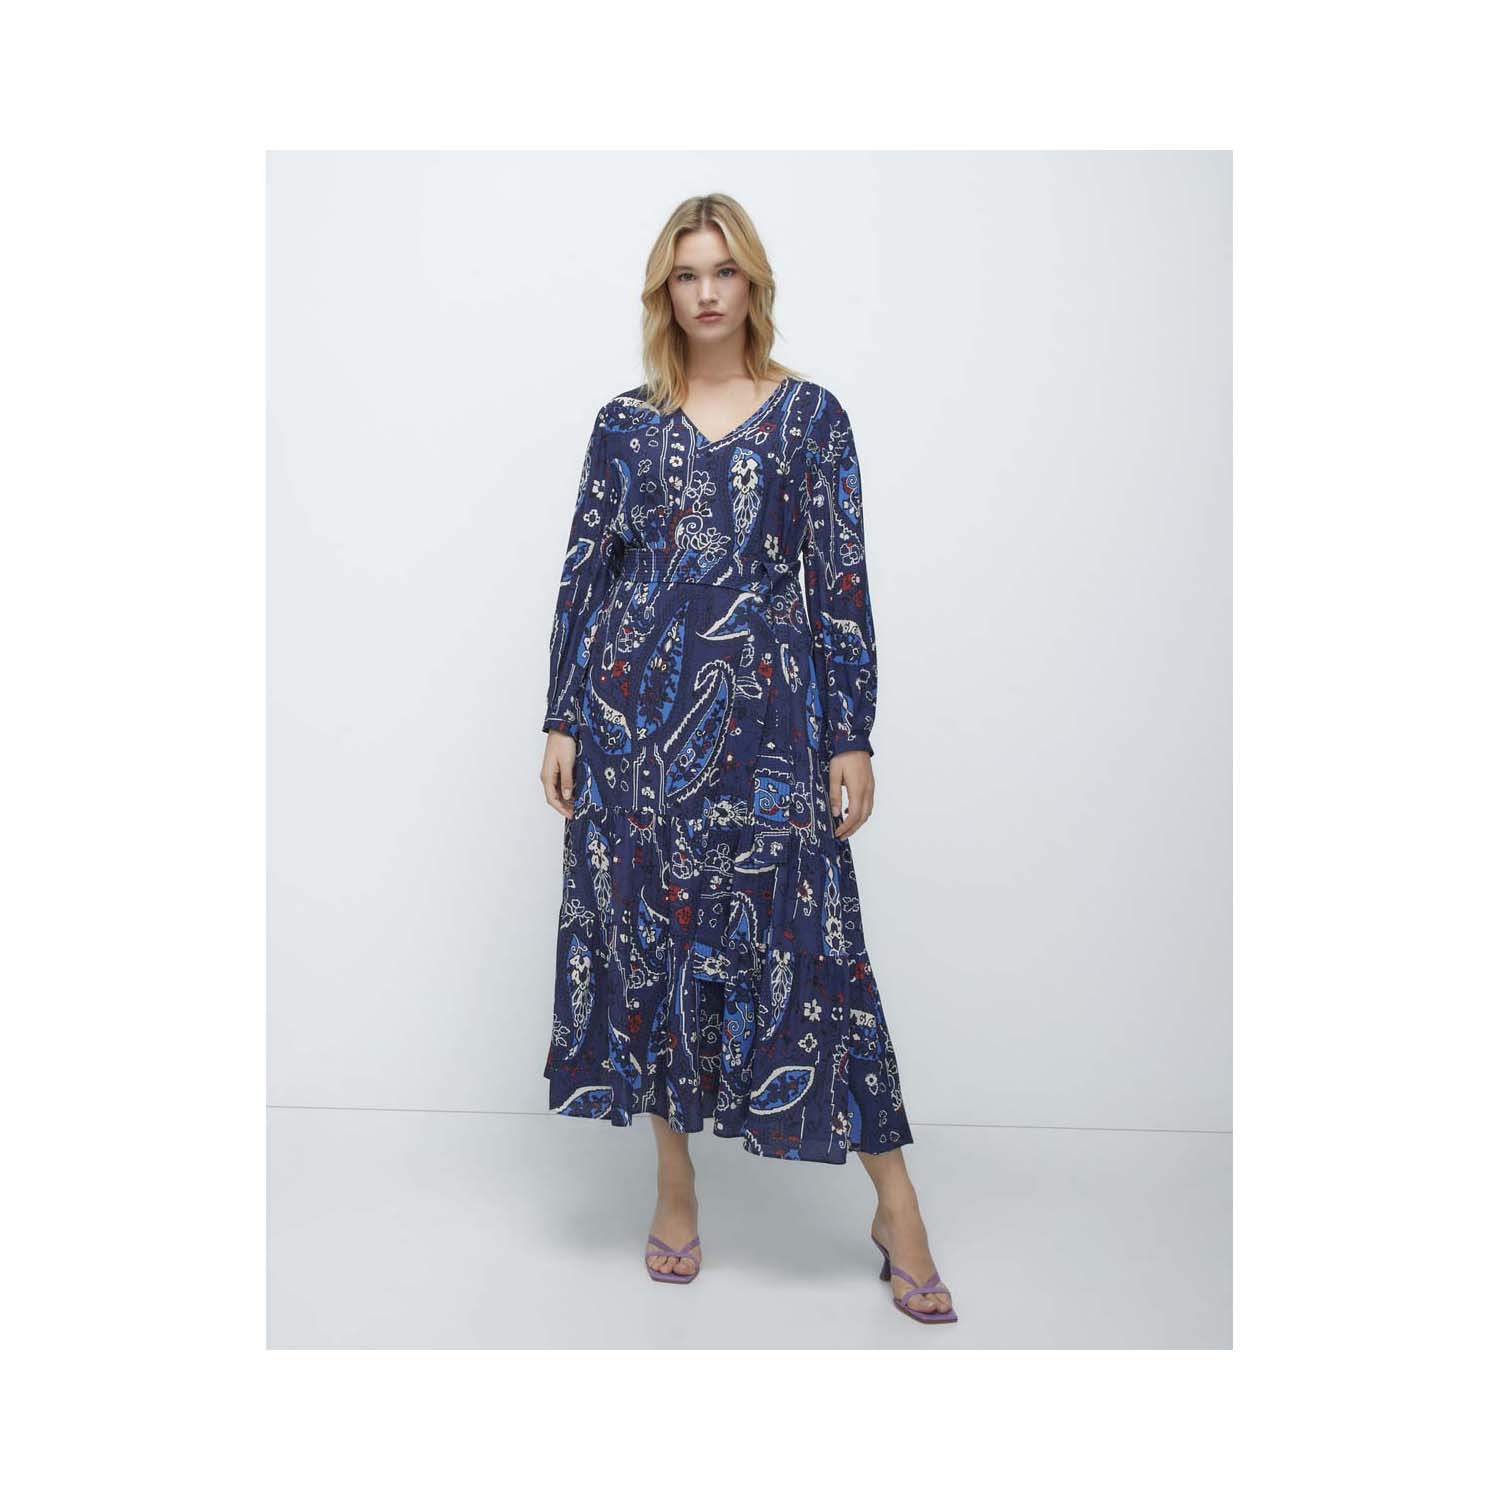 Couchel Long-Sleeved Floral Dress - Multi 1 Shaws Department Stores